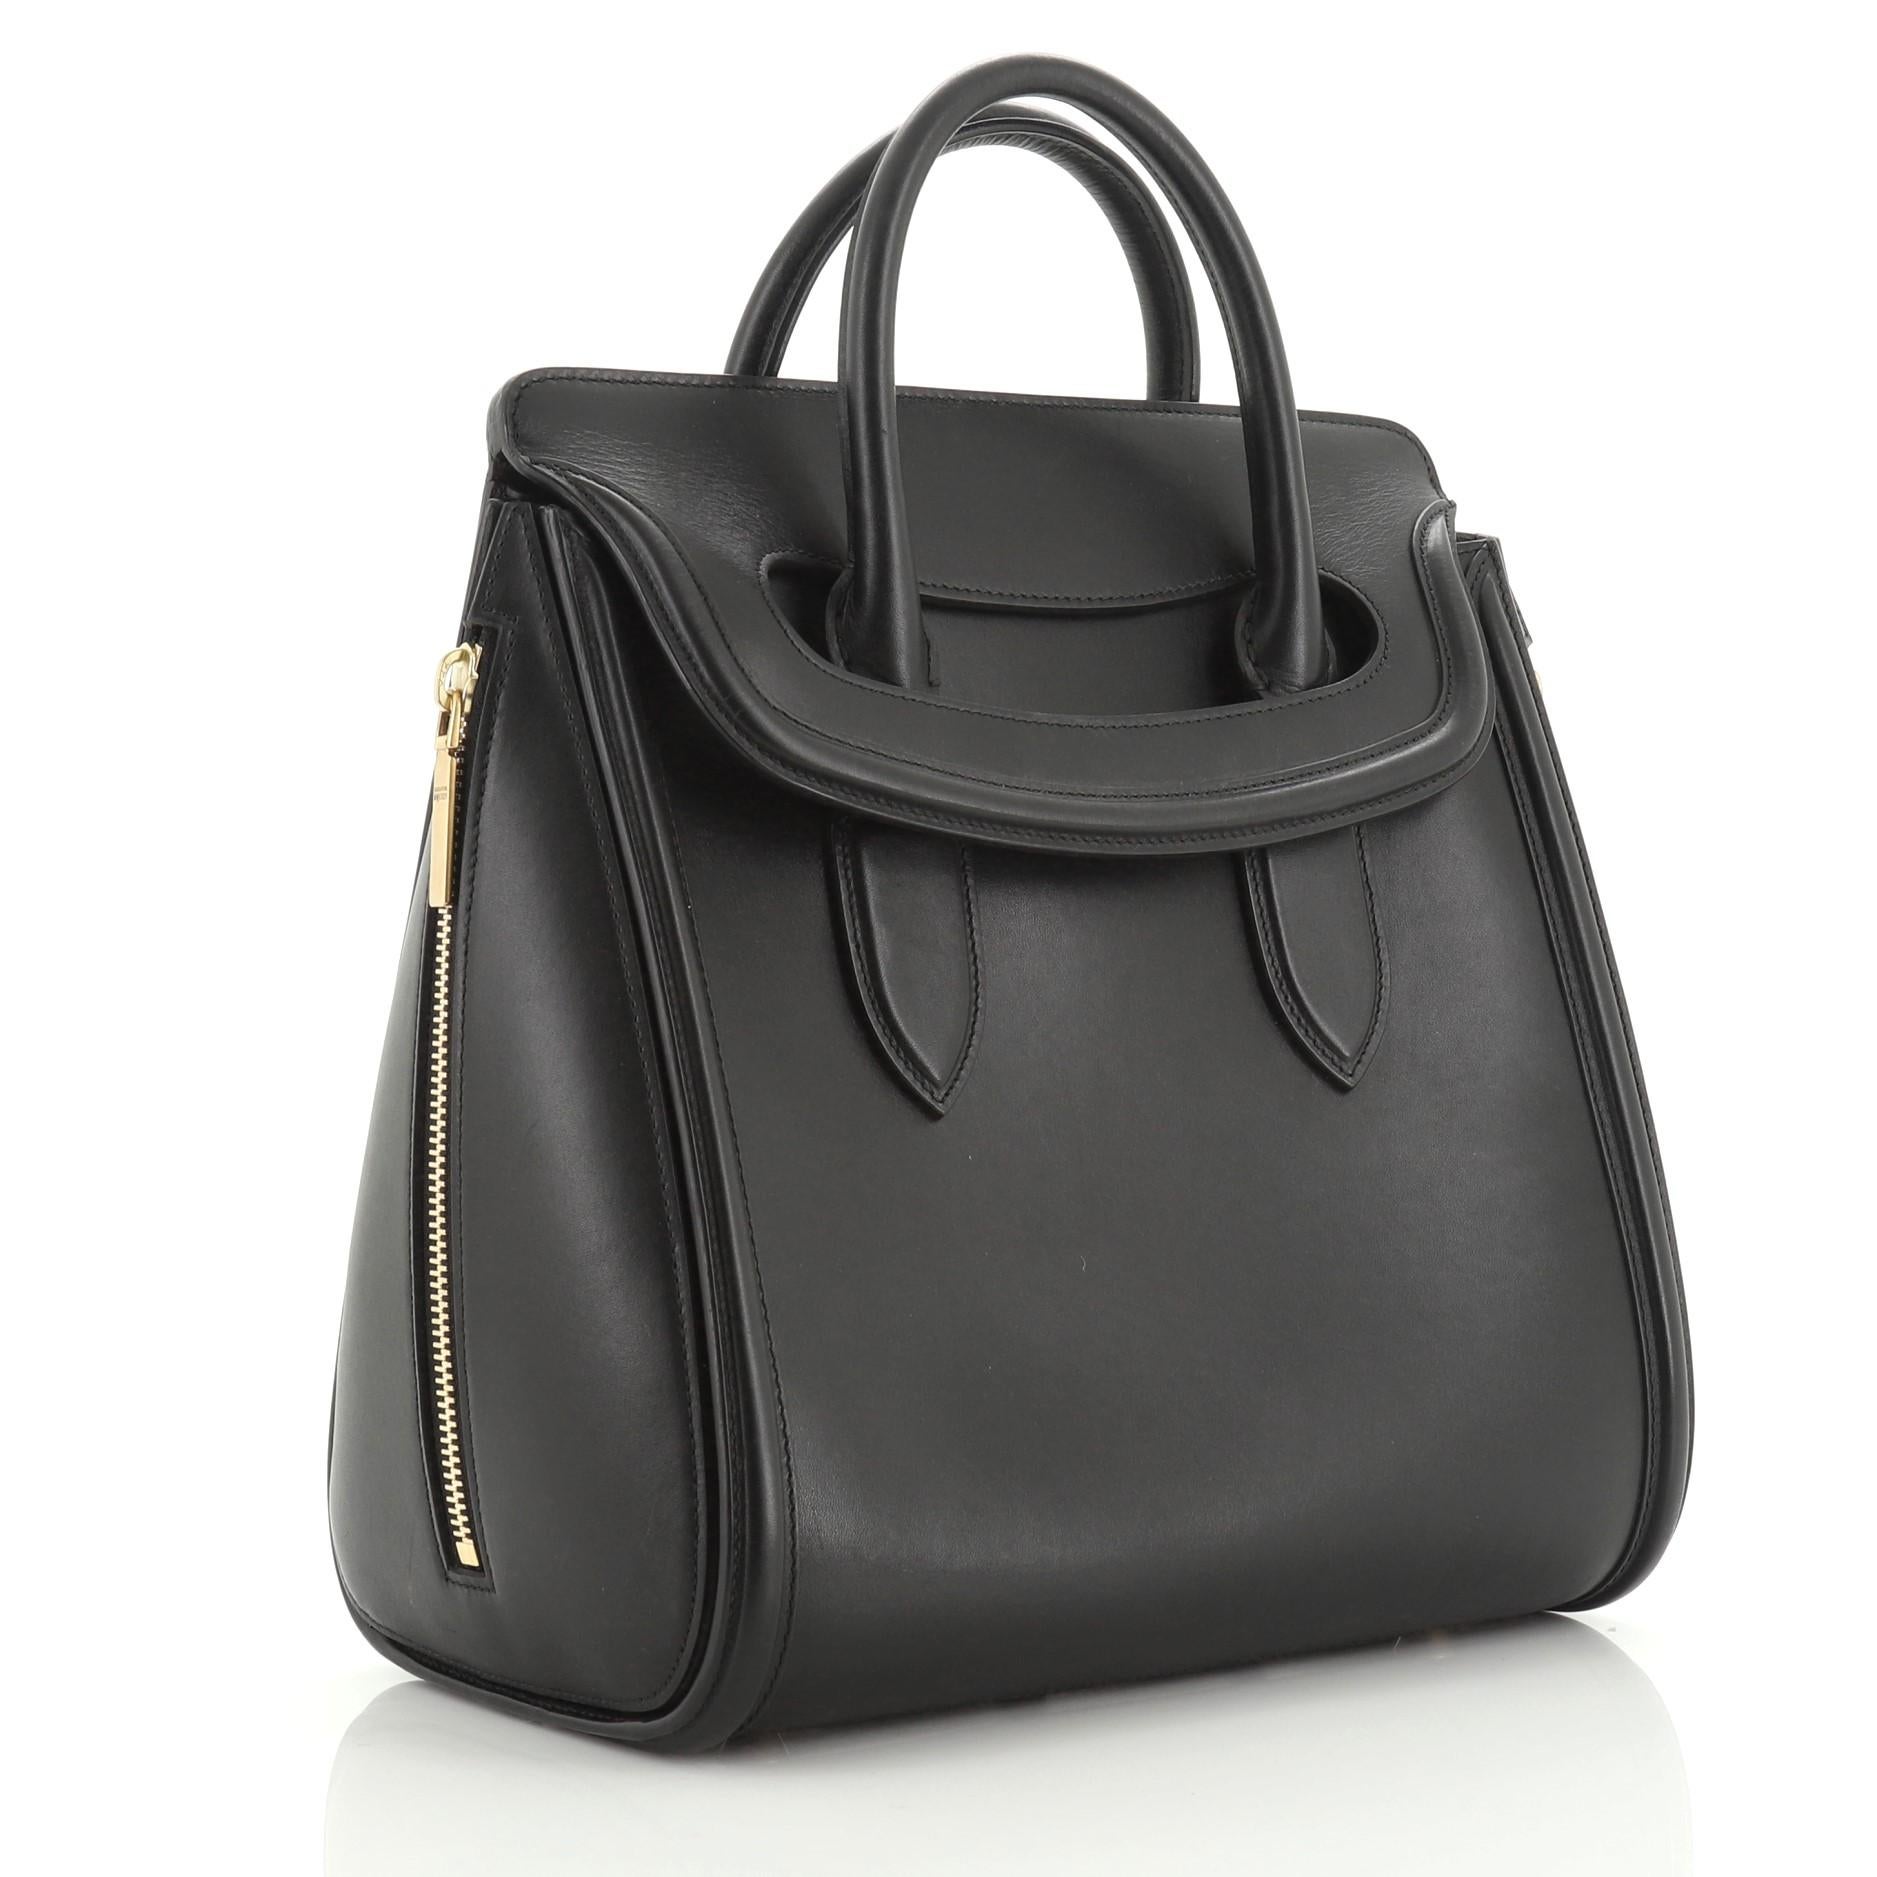 This Alexander McQueen Heroine Tote Leather Large, crafted from black leather, features dual rolled leather handles, gusseted side zipper details, protective base studs, and aged gold-tone hardware. Its flap closure opens to a gray suede interior